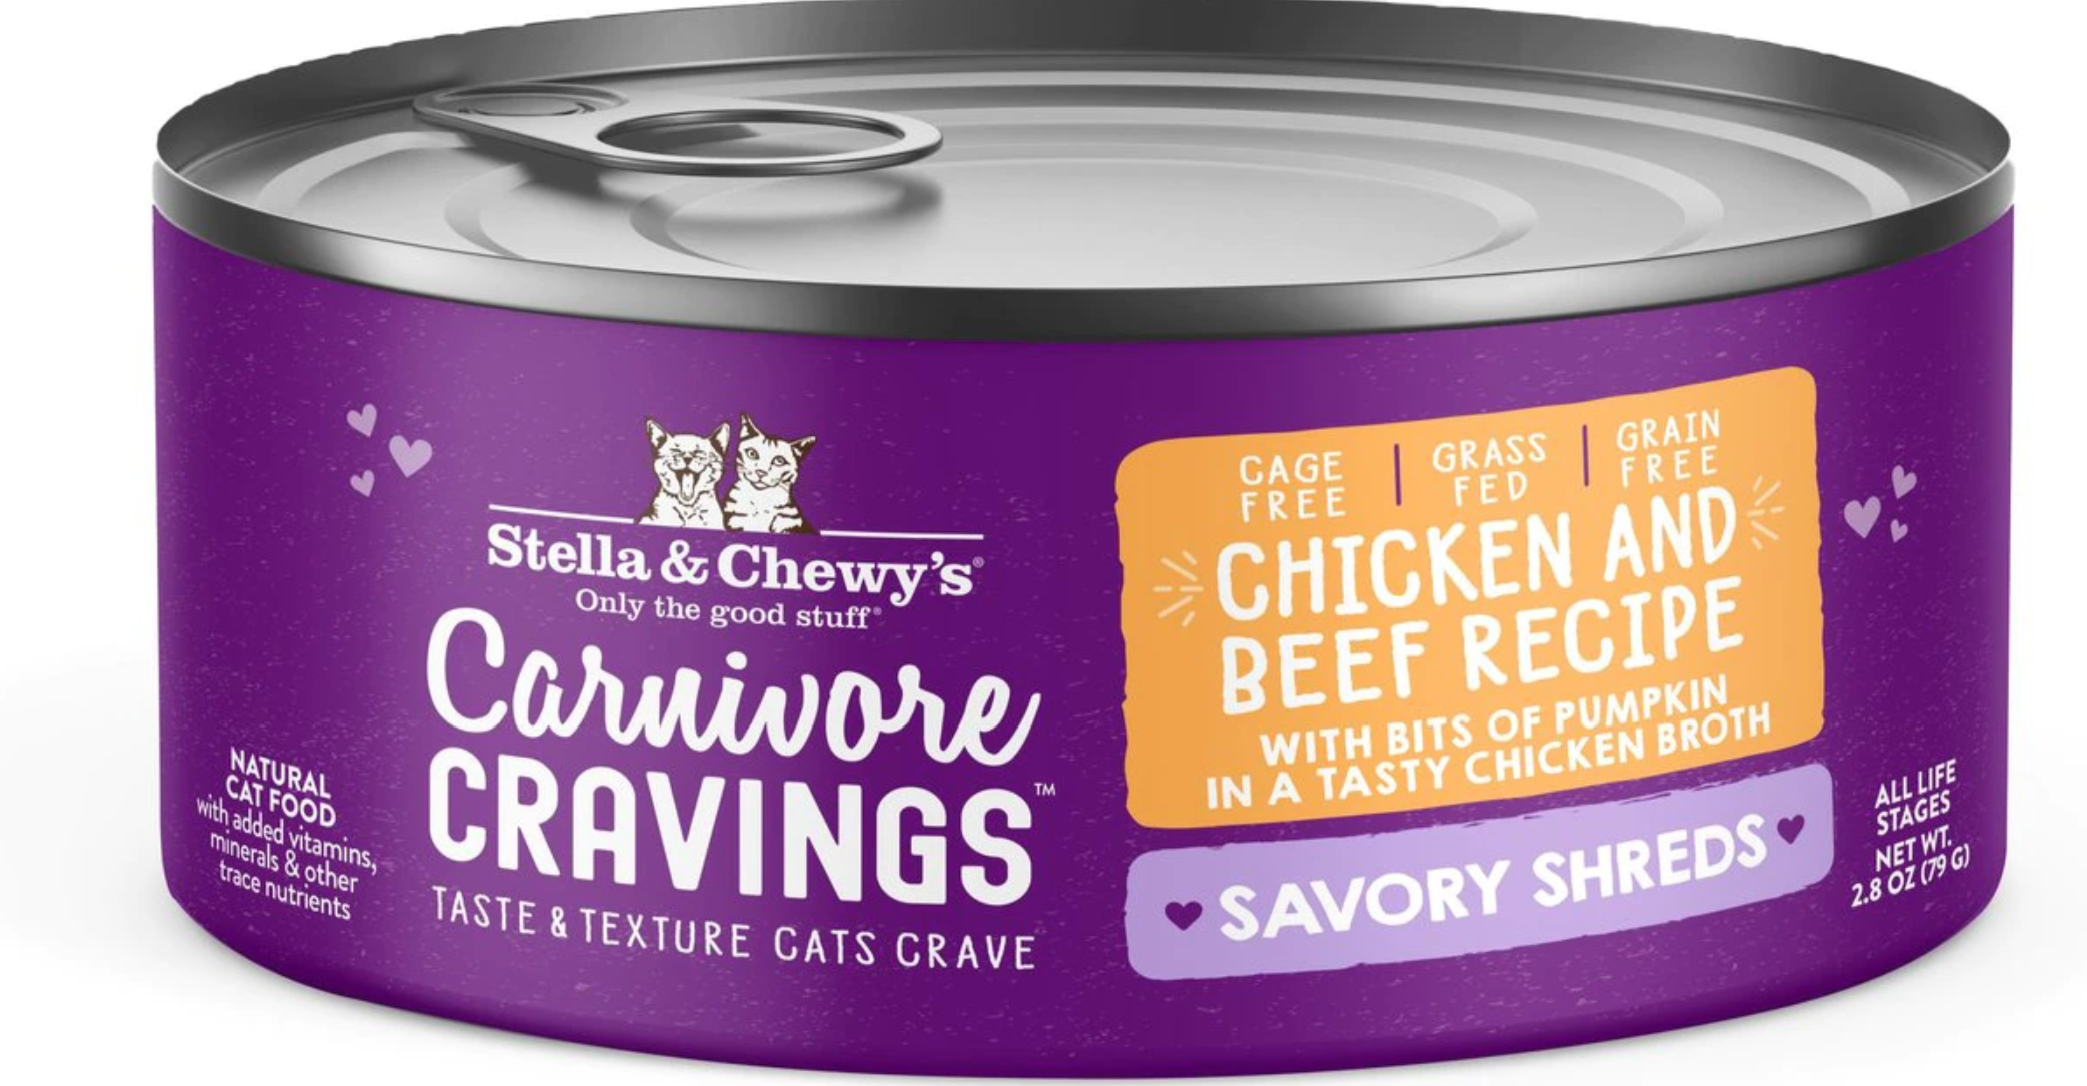 Stella & Chewy's Carnivore Cravings Savory Shreds Chicken & Beef Recipe - 5.2oz Can